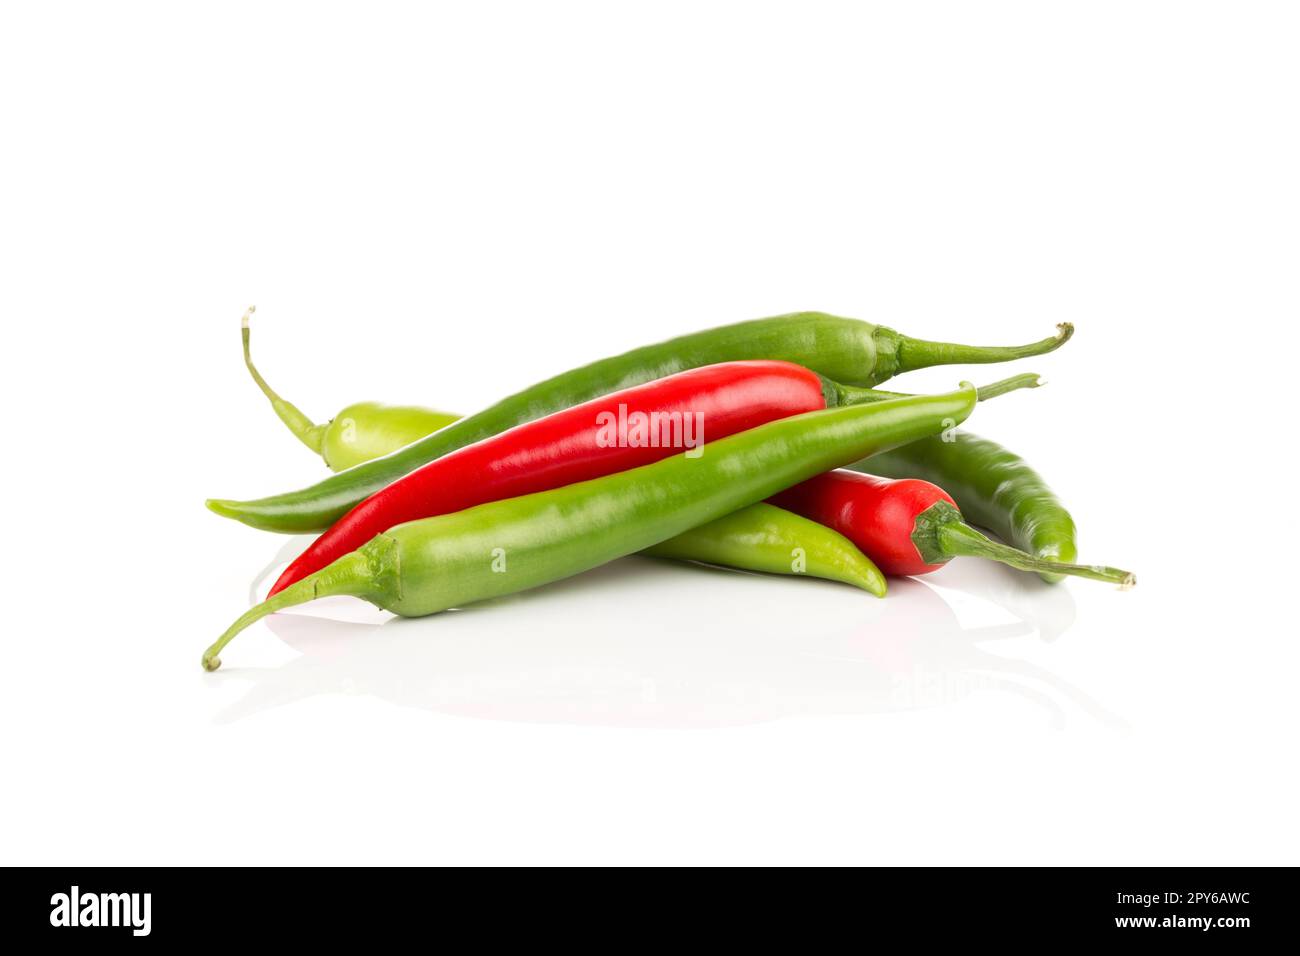 fresh green and red chili pepper Stock Photo